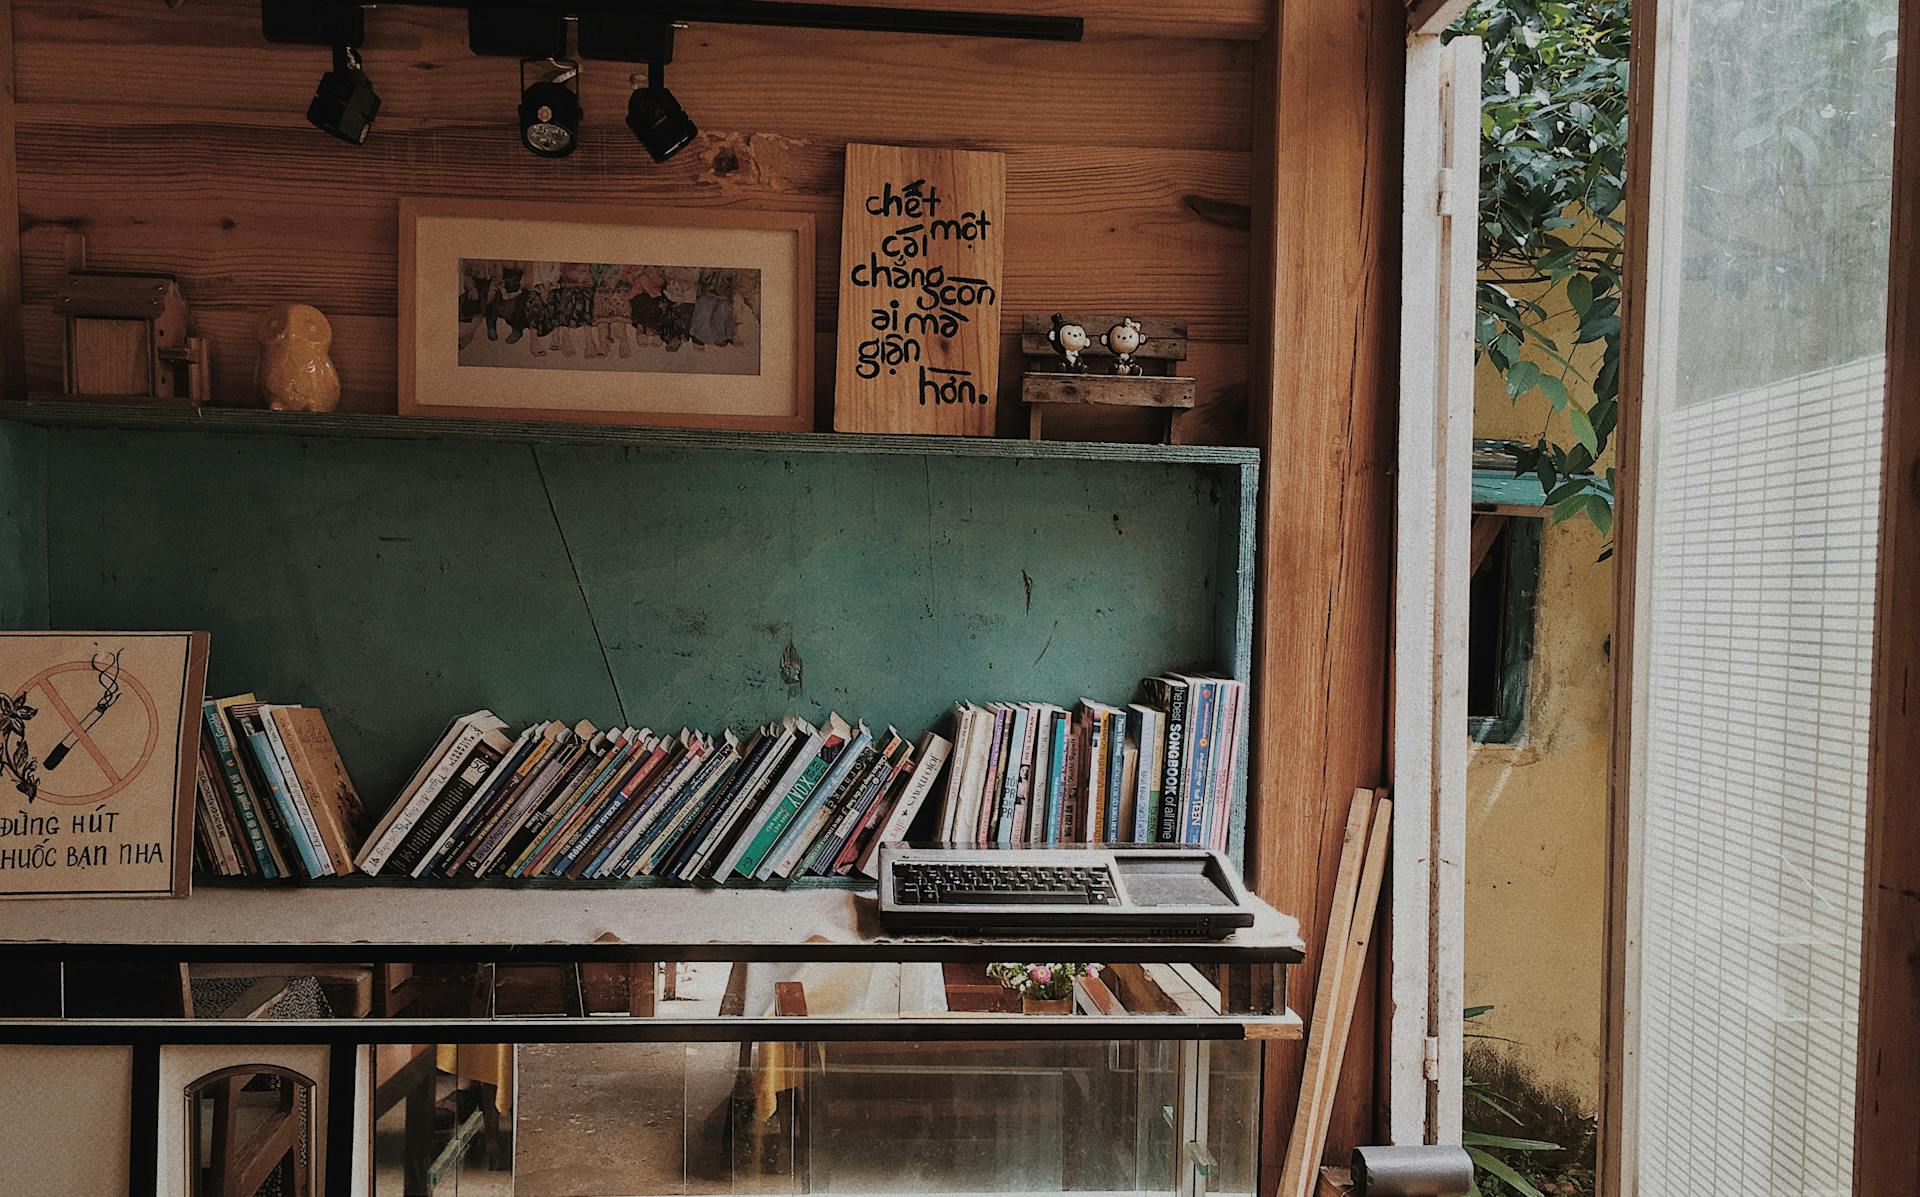 Books placed in a wooden rack on the wall | Source: Pexels